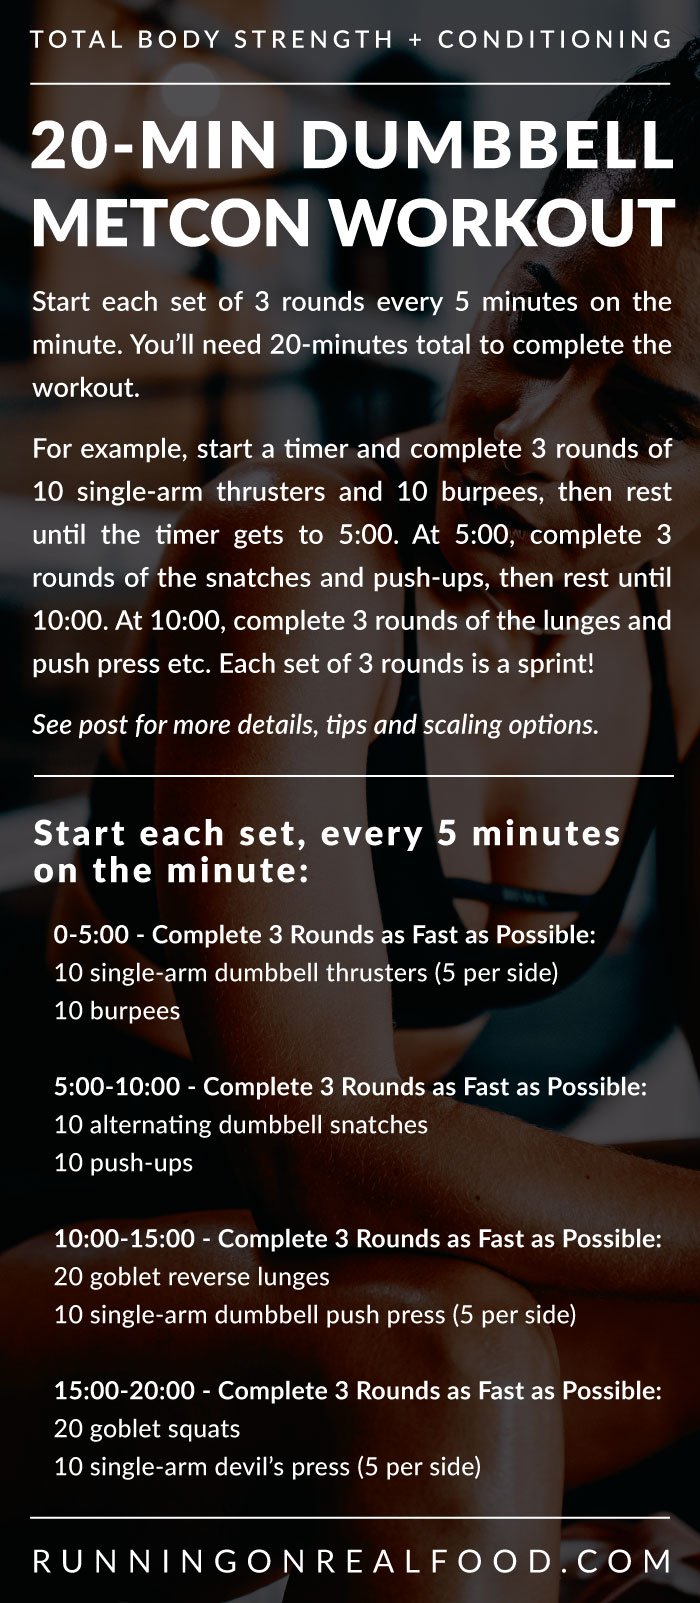 Written out details for a 20 minute dumbbell workout.